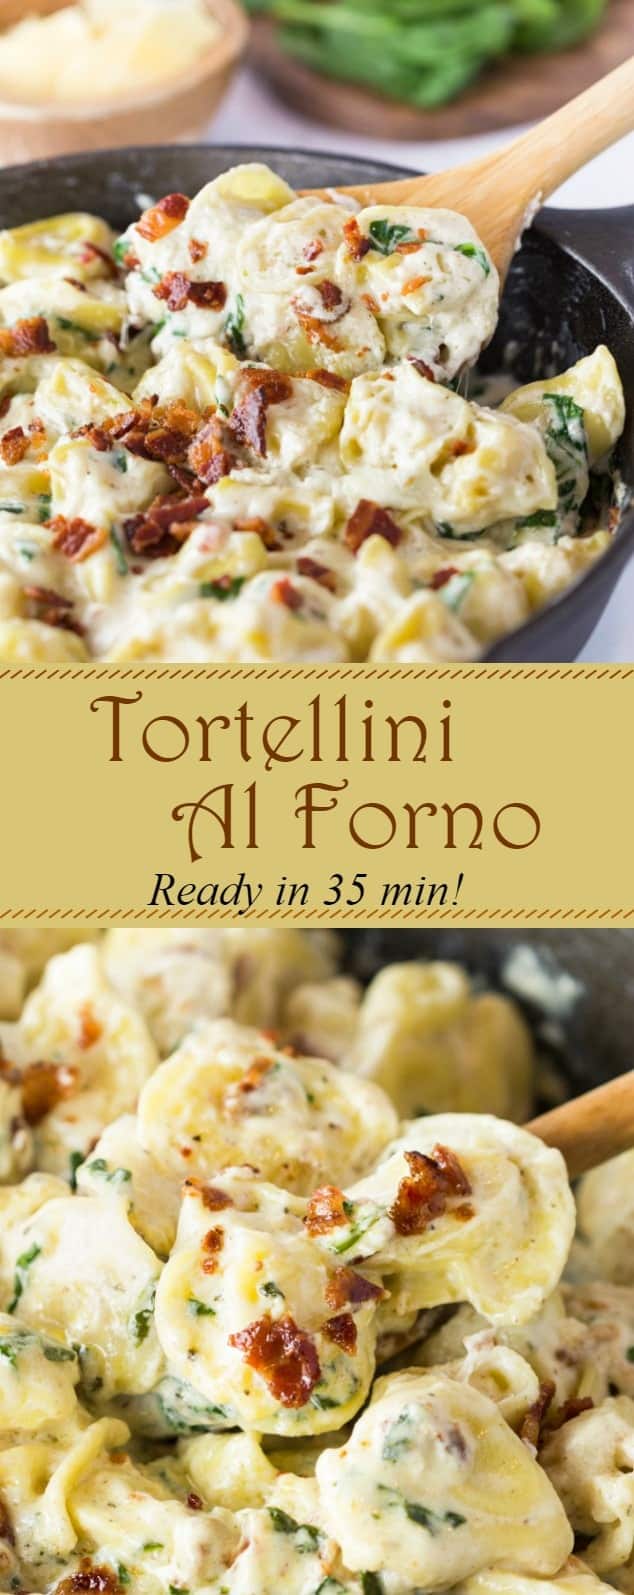 This Tortellini Al Forno features stuffed tortellini tossed in a rich and creamy garlic cheese sauce and topped with crumbled bacon. | The Cozy Cook | #Tortellini #Pasta #OliveGarden #AlForno #Dinner, #Cheese #Parmesan #Bacon #Dinner #ComfortFood #CreamSauce